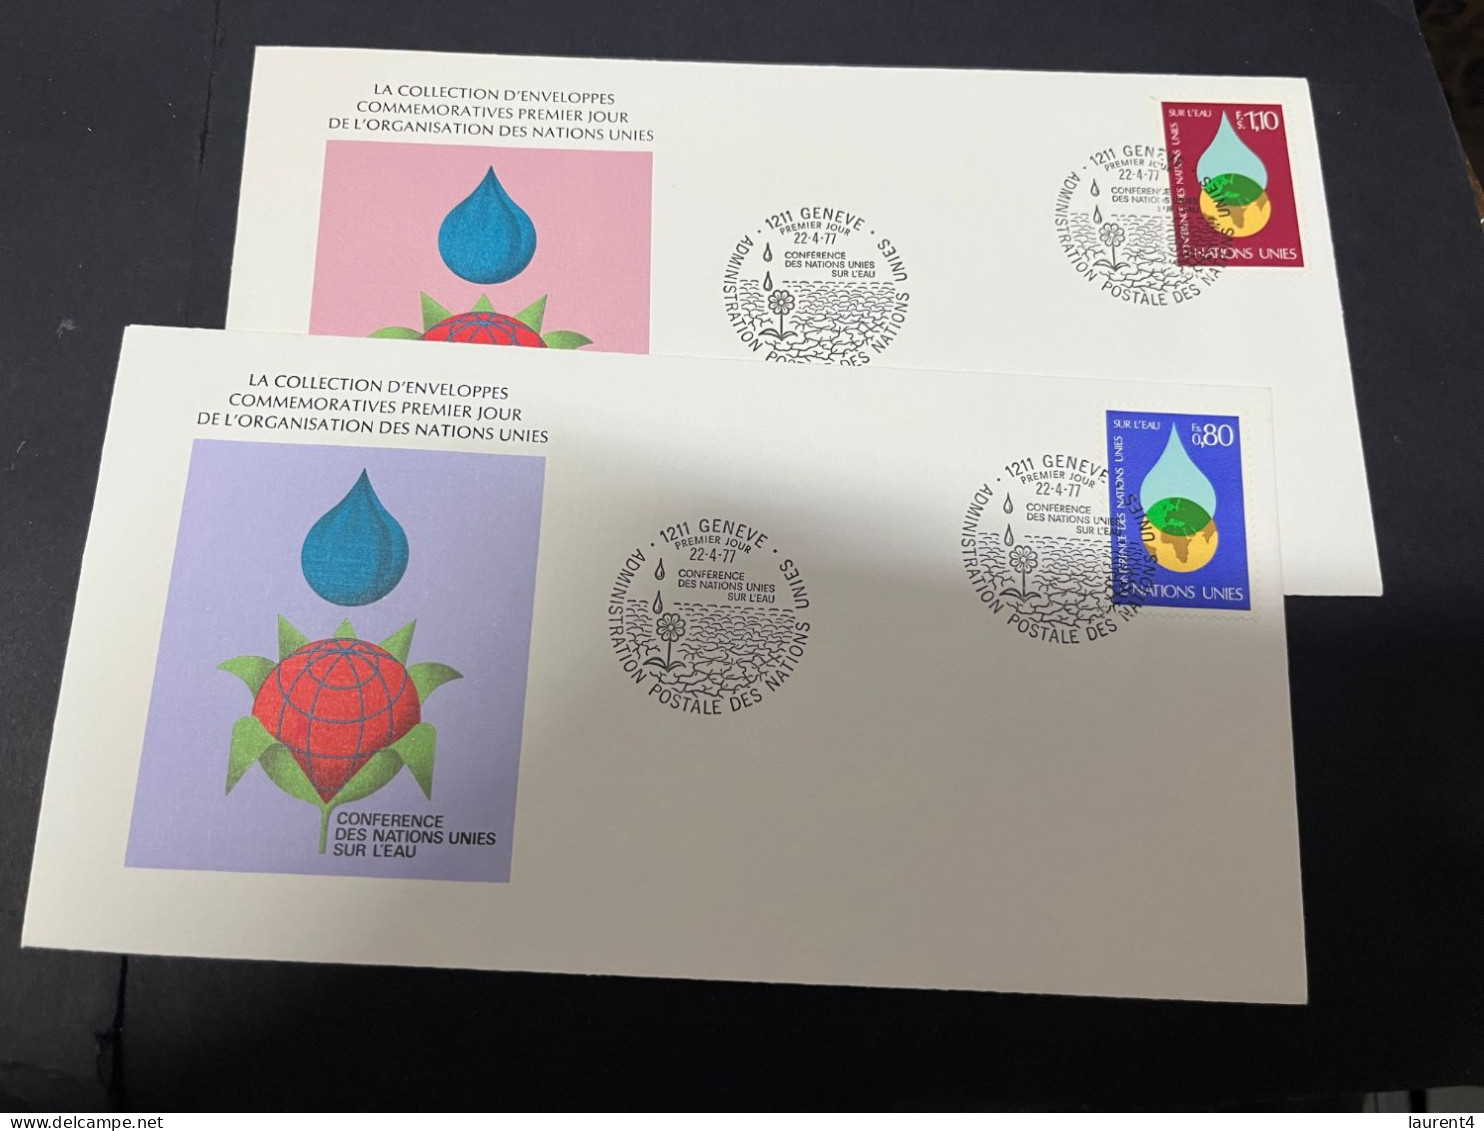 19-4-2024 (2 Z 29) United Nations (Switzerland Office) X 2 FDC - Water Conference - FDC